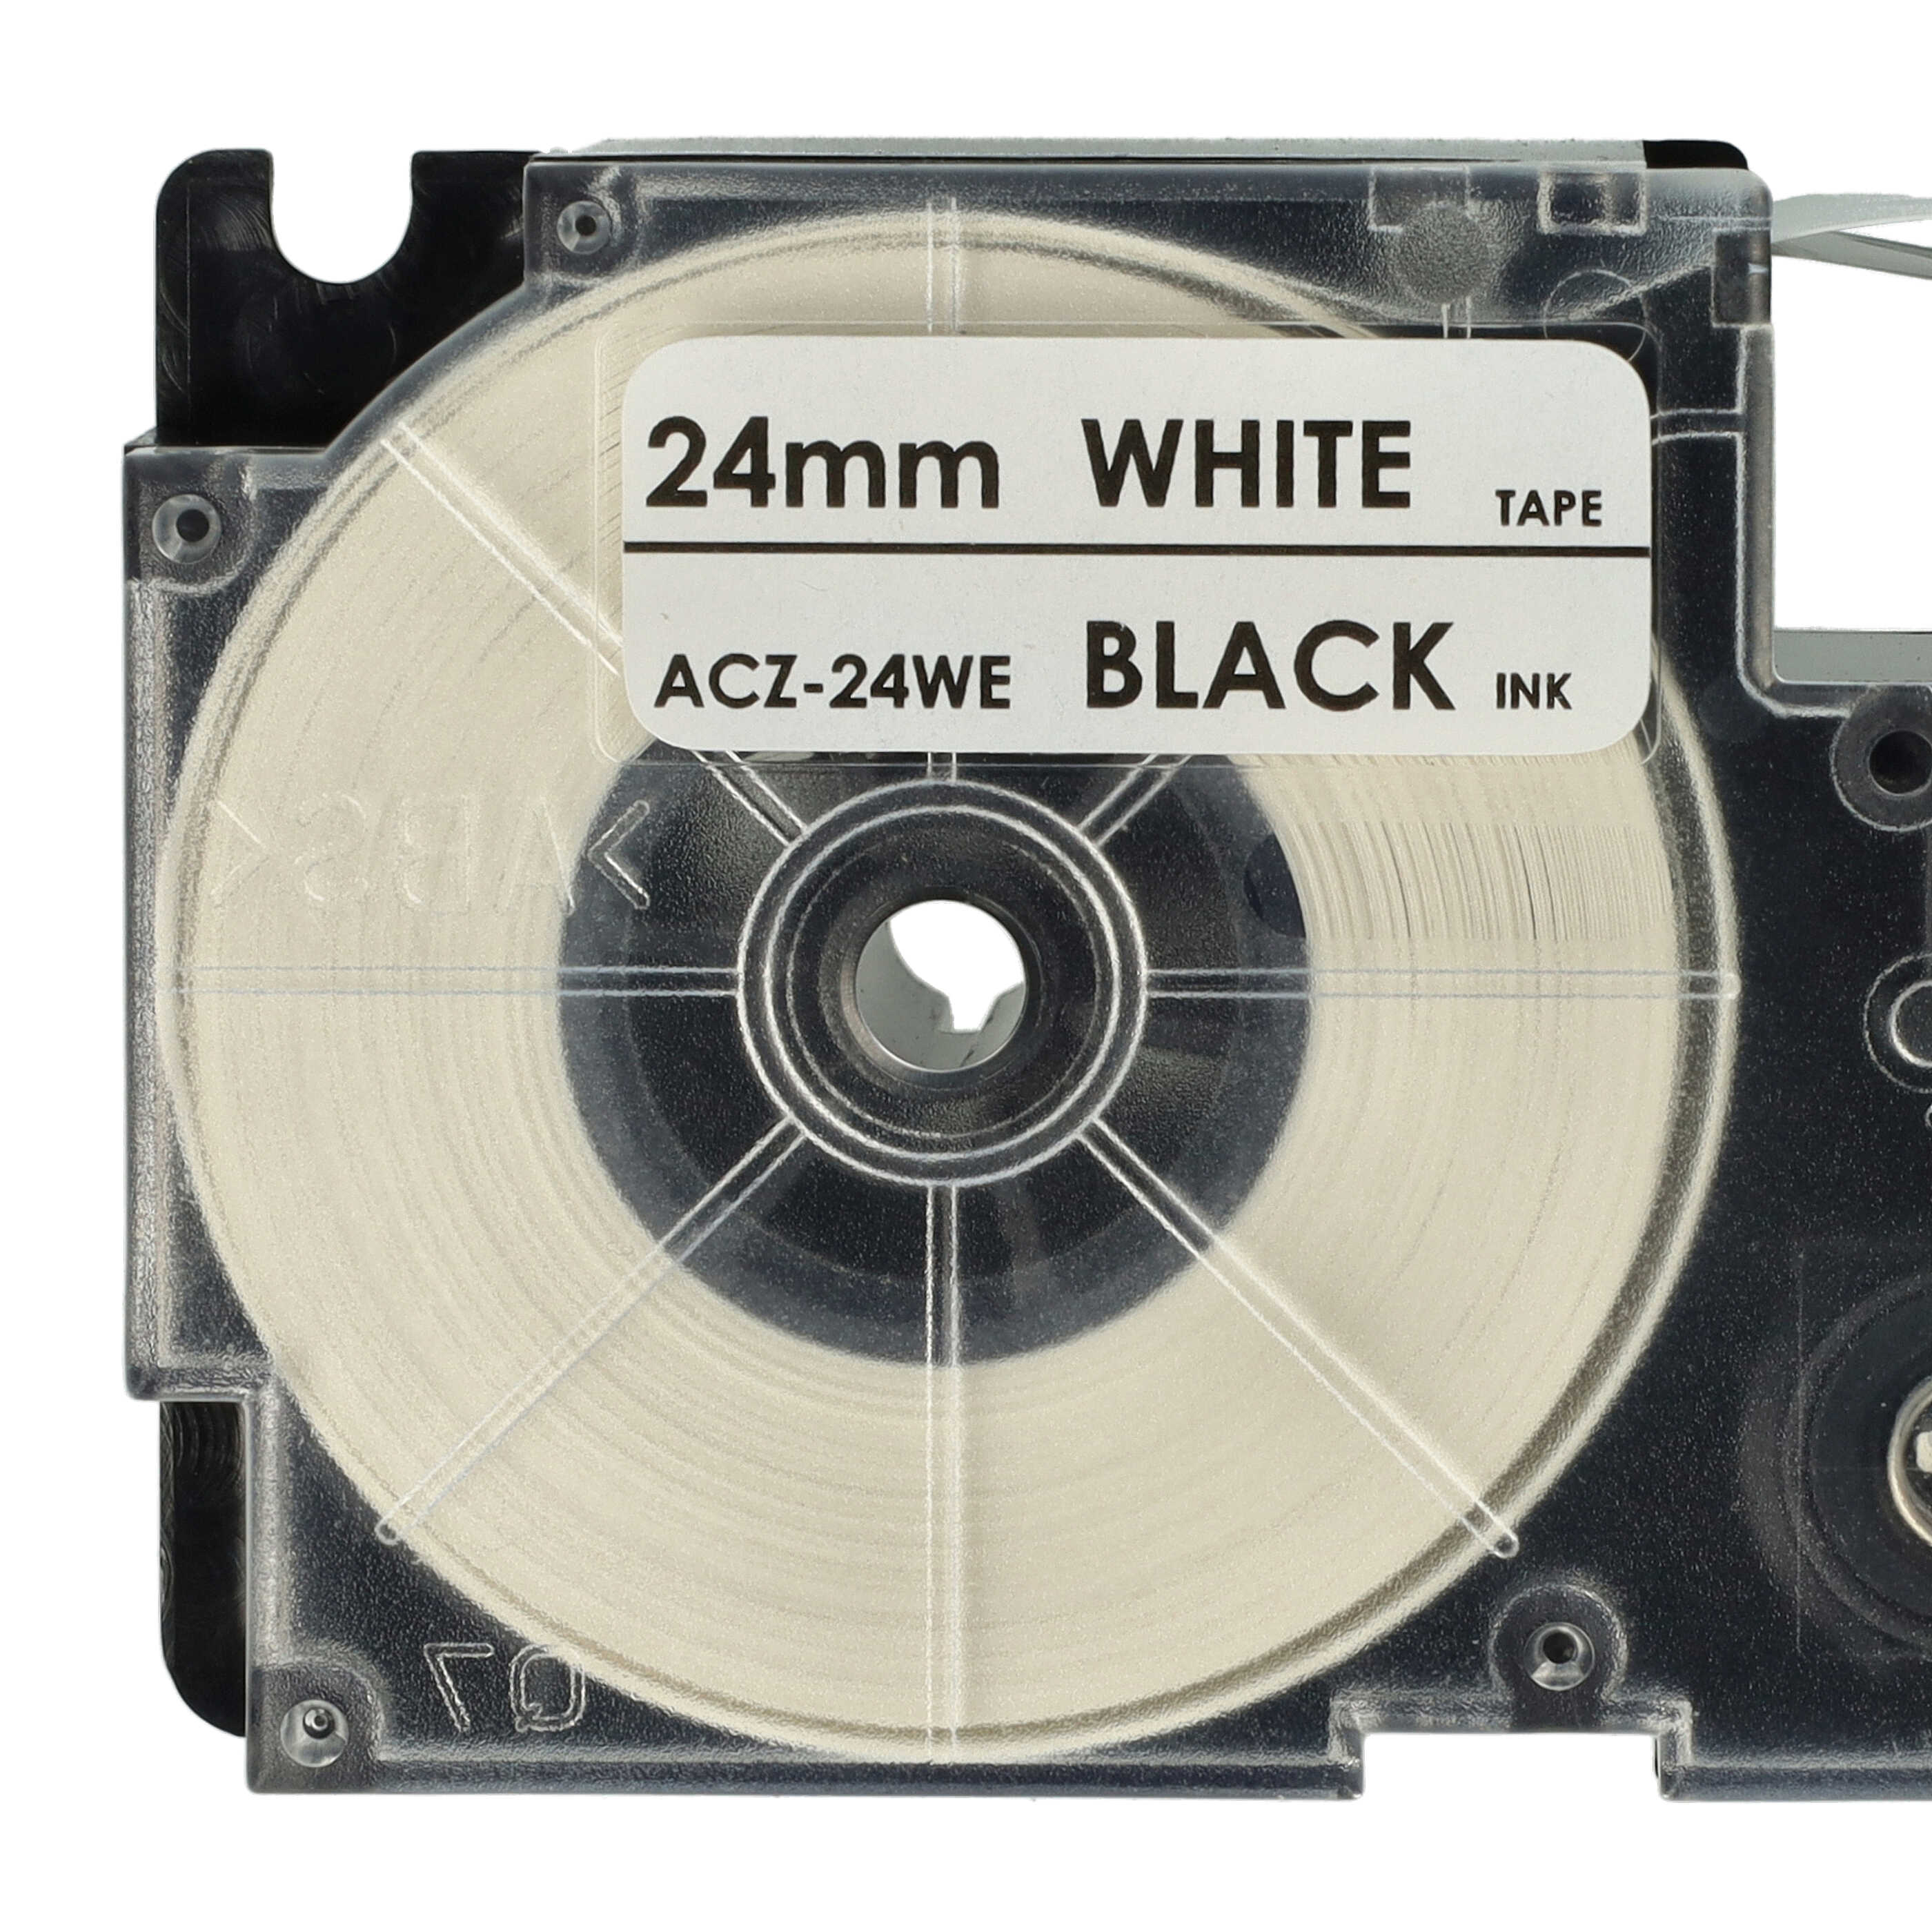 5x Label Tape as Replacement for Casio XR-24WE1 - 24 mm Black to White